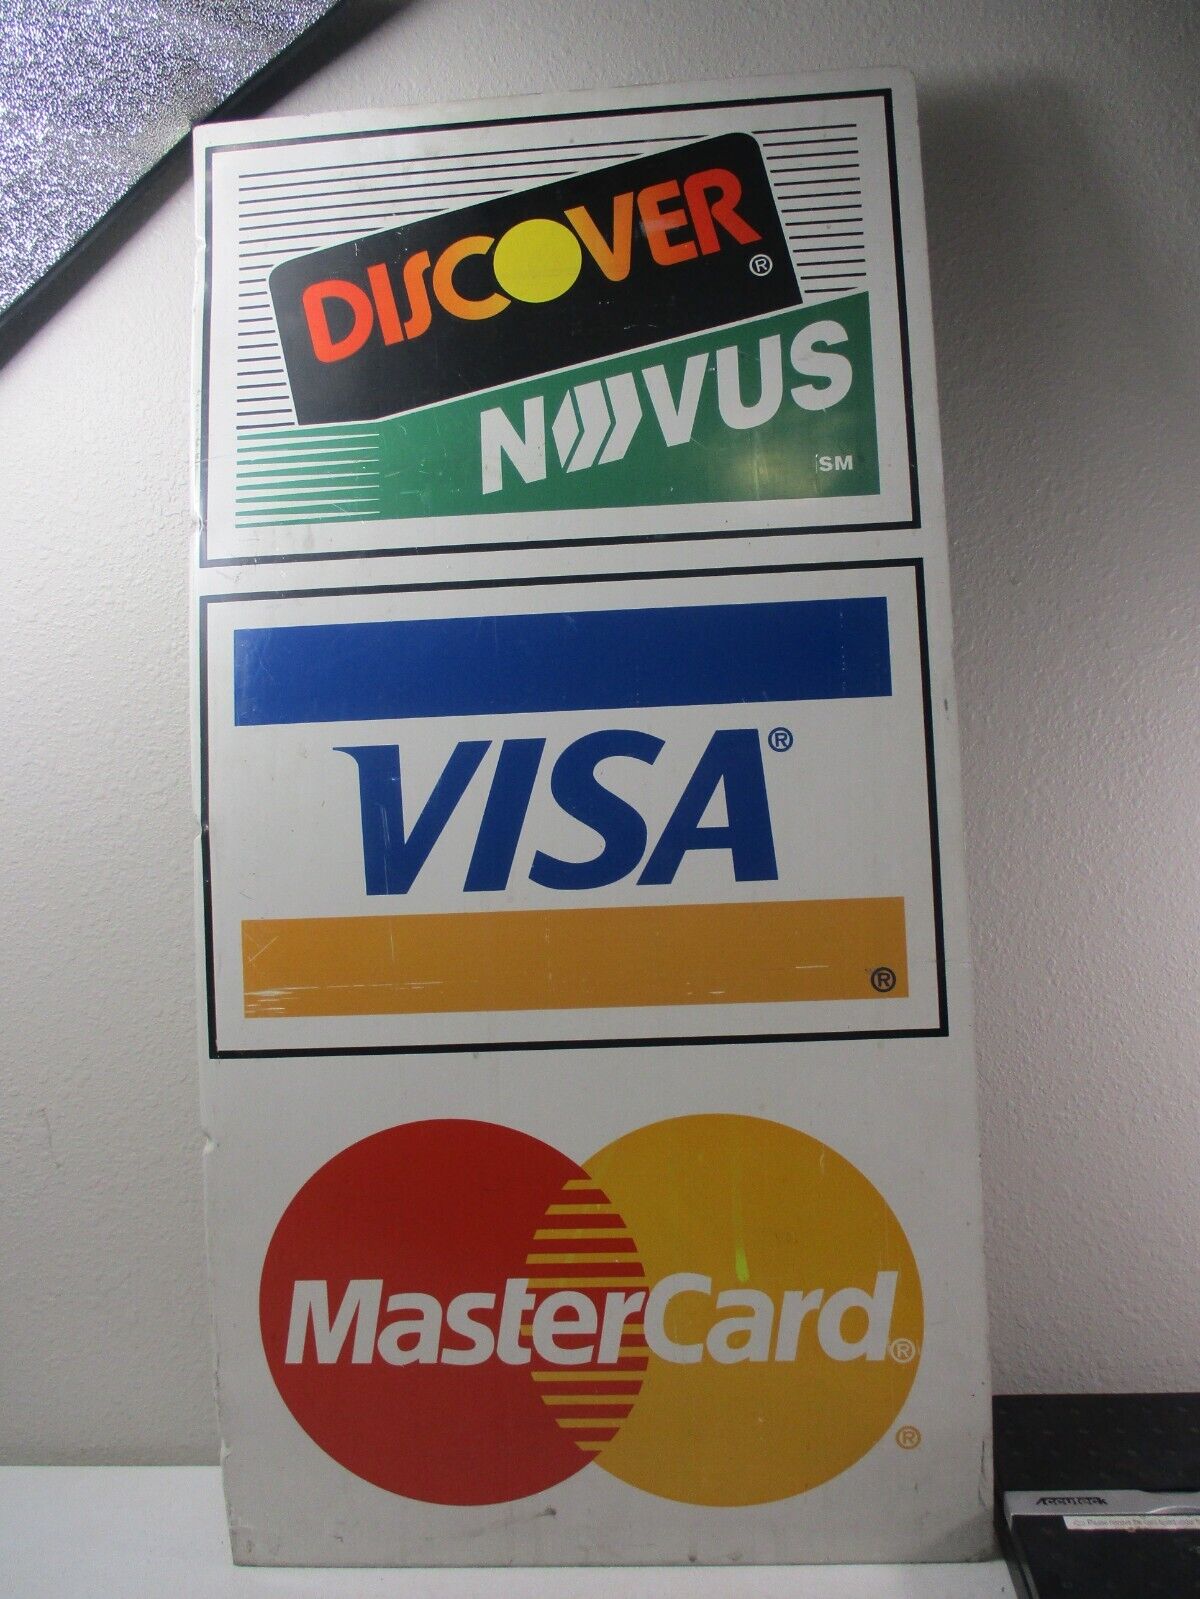 VINTAGE * DISCOVER * MASTER CARD *  VISA * TWO SIDED  METAL SIGN 16” X 31 1/2”